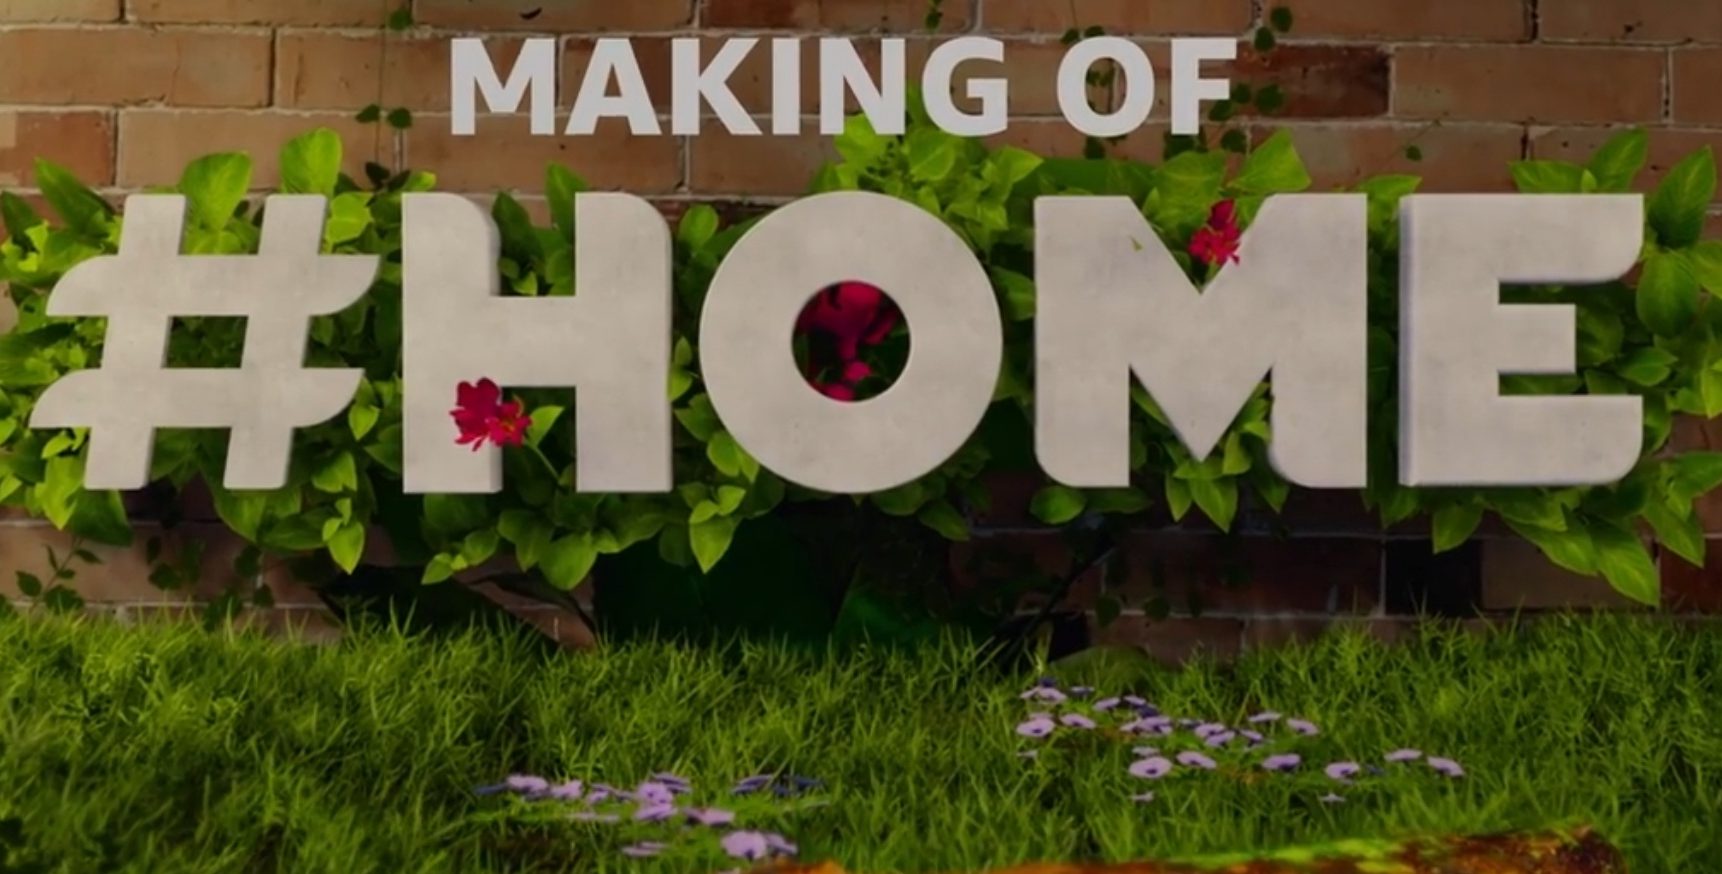 #Home, a feel good movie is back with a feel good BTS video!